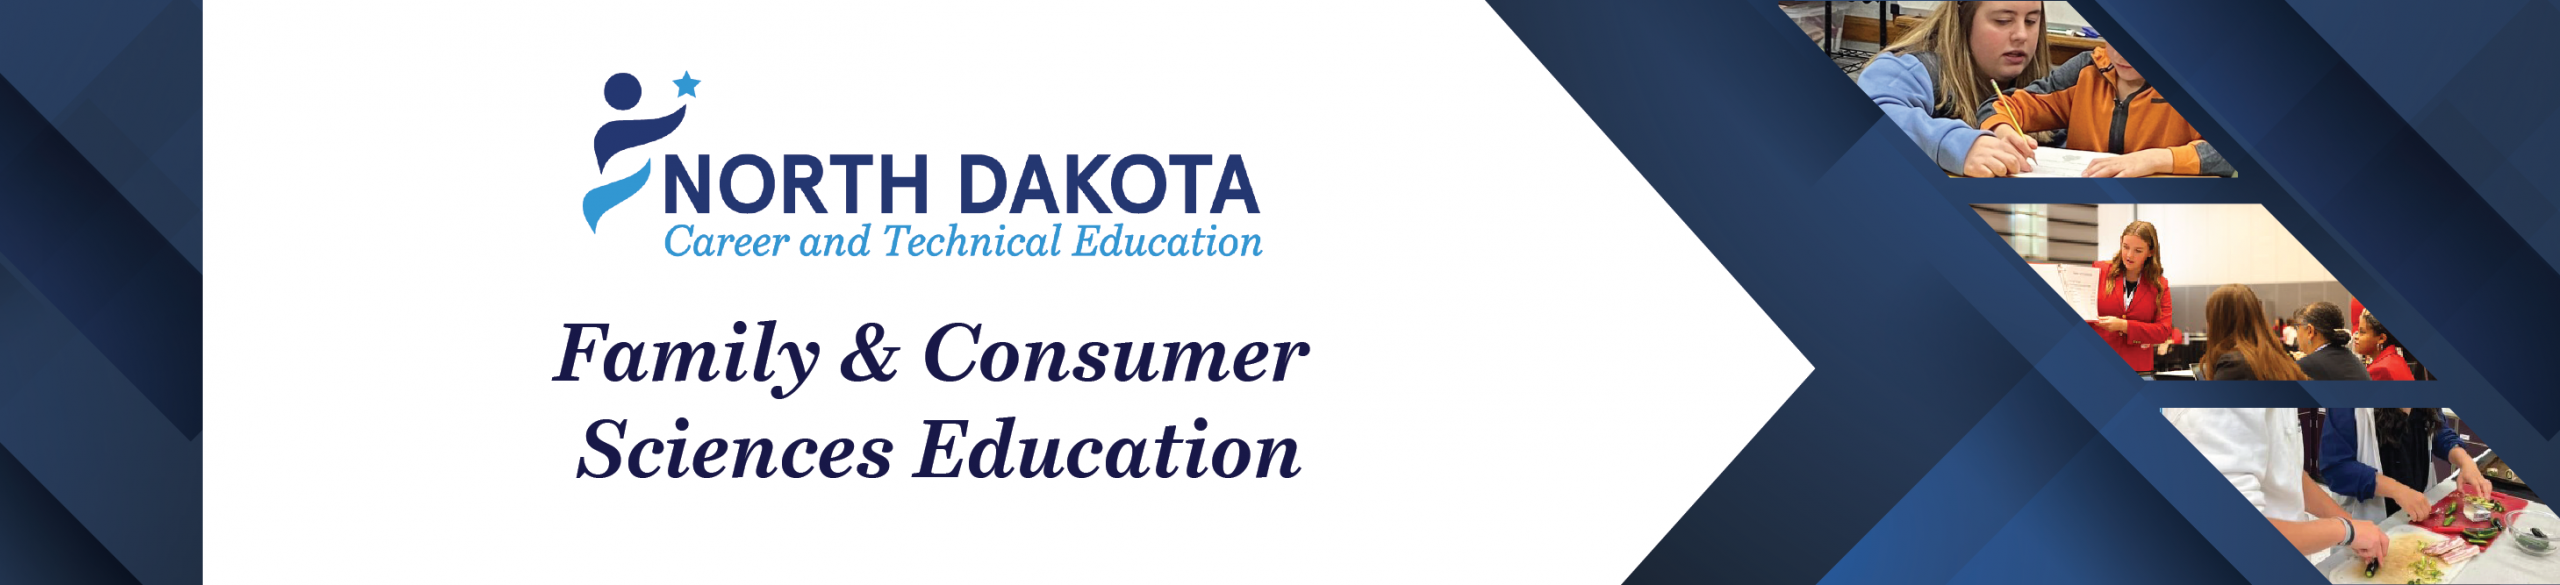 Family and Consumer Sciences Education Banner and Images